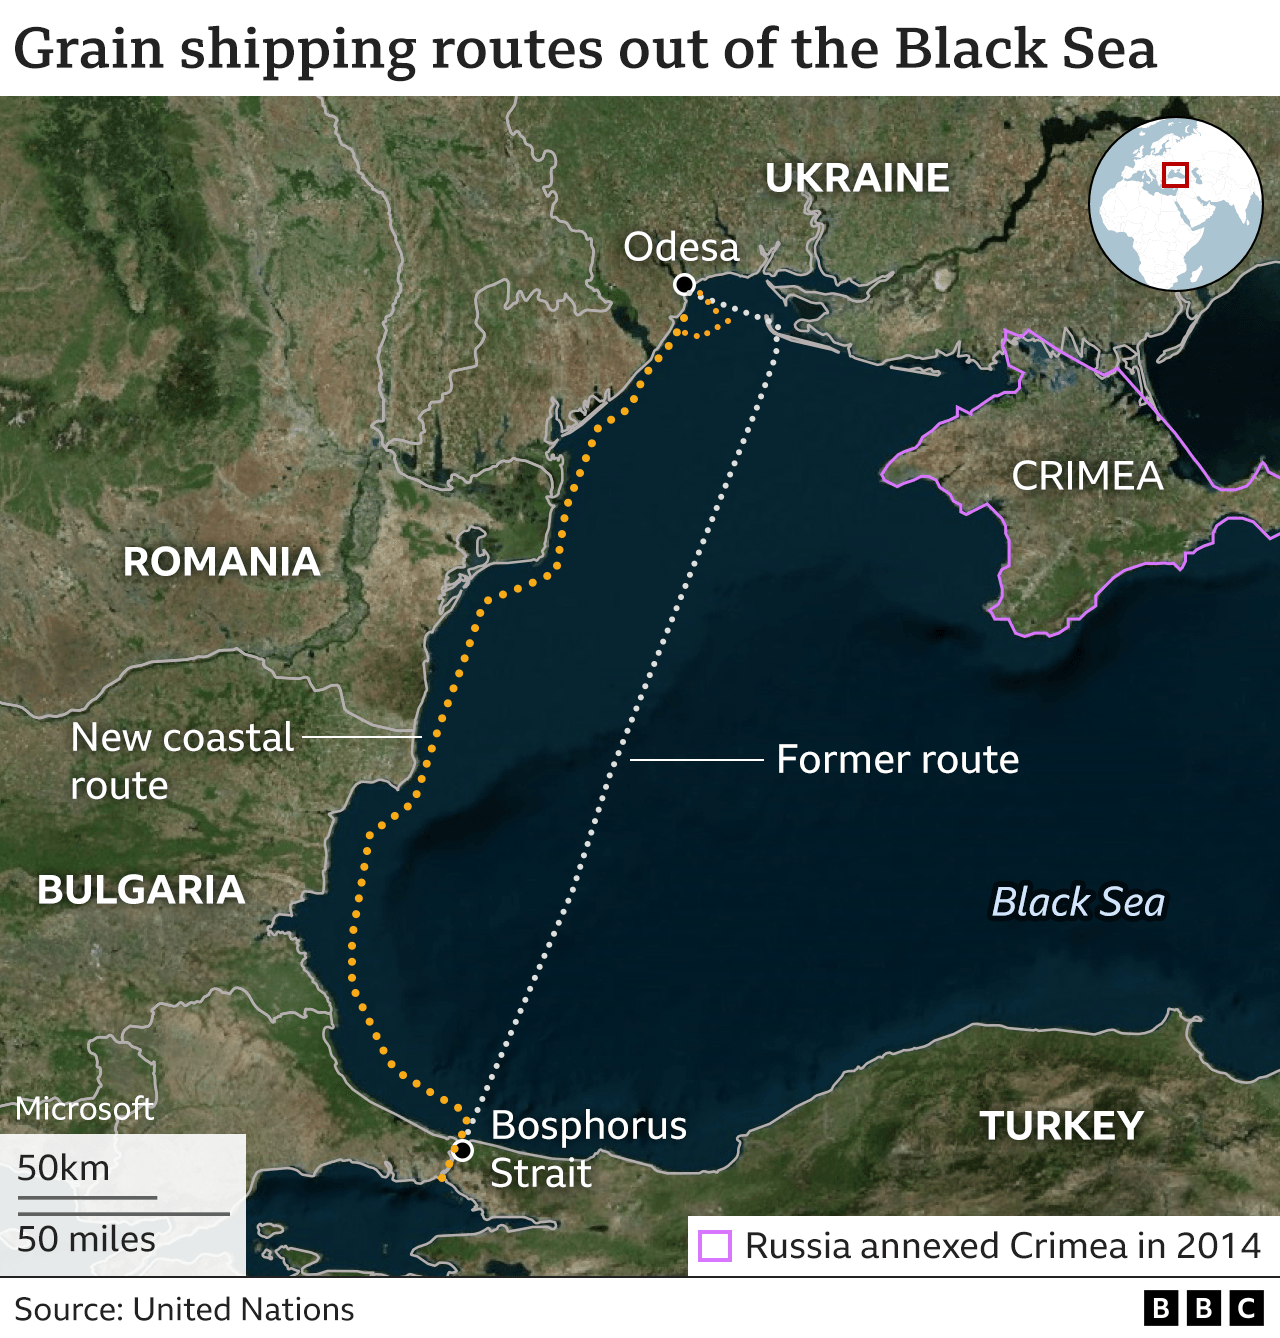 Map showing old and new routes for grain ships across the Black Sea